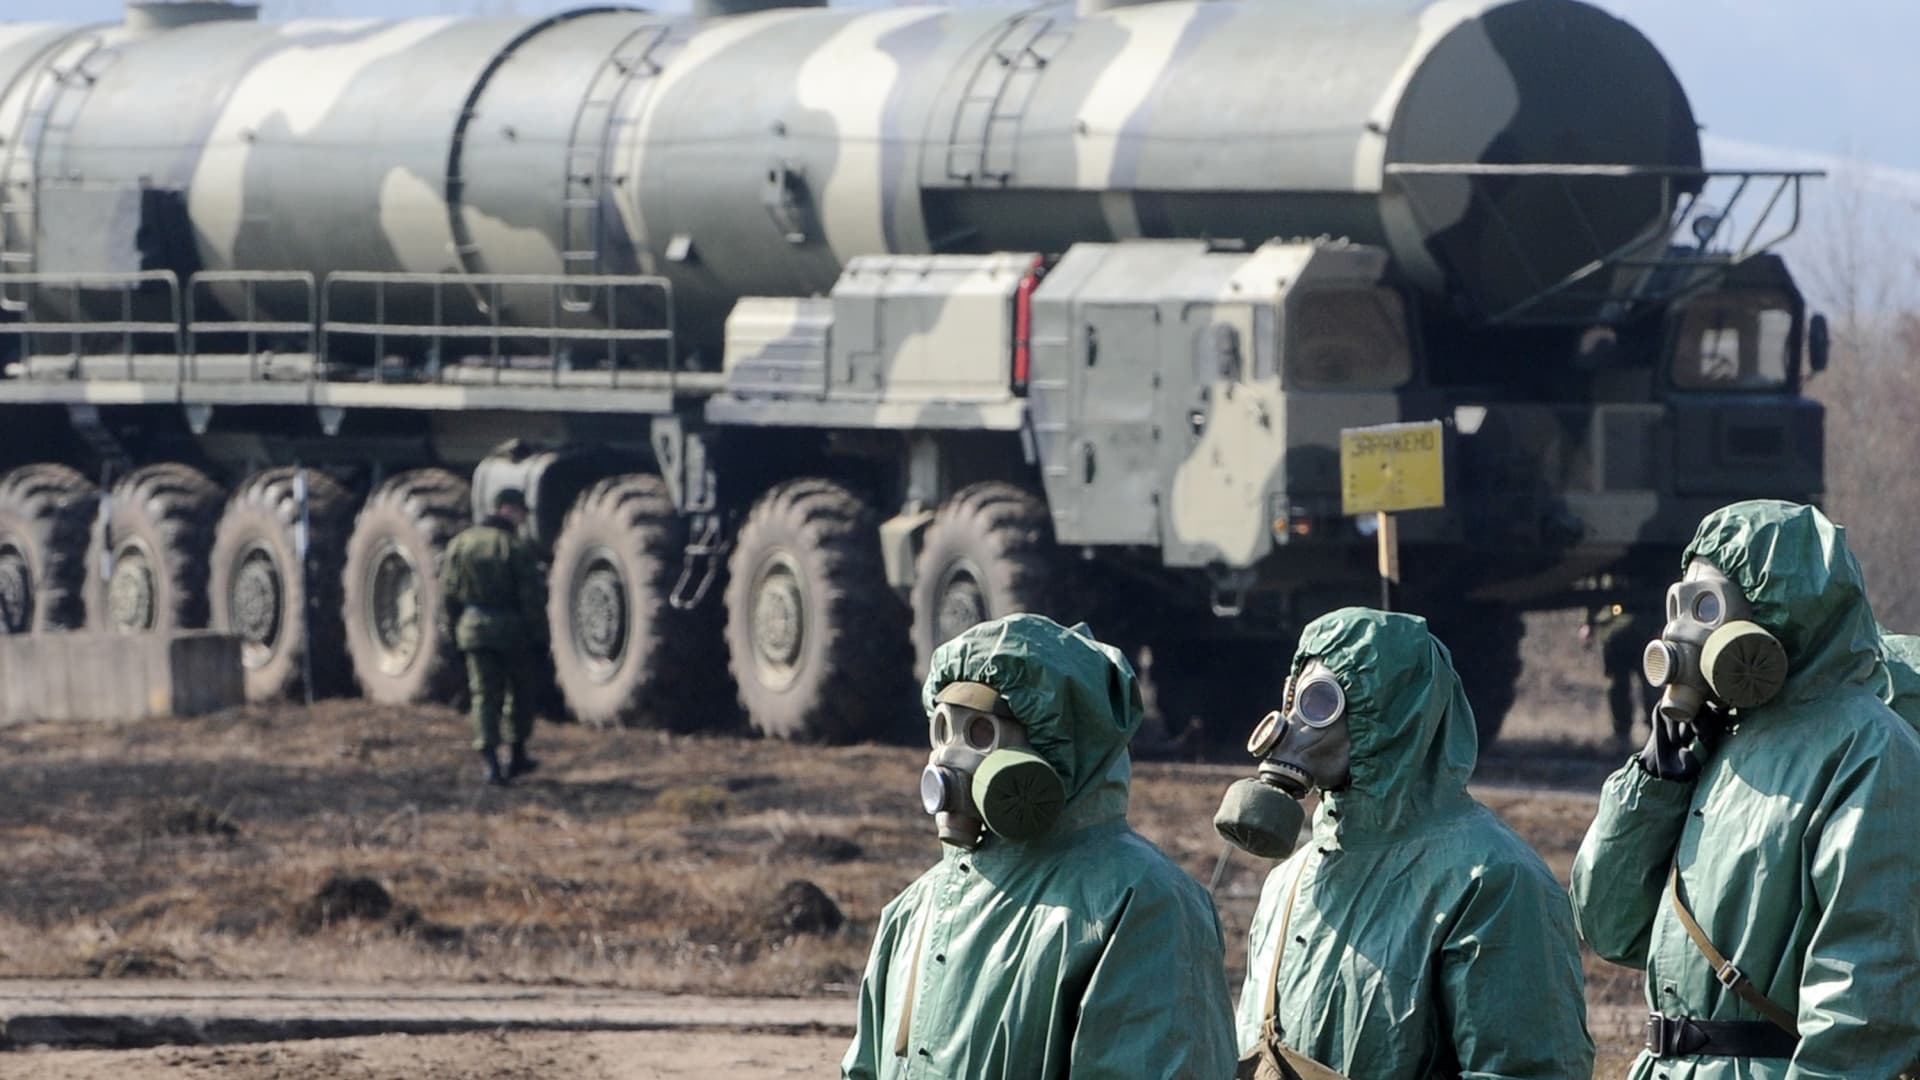 Russian soldiers wear chemical protection suits as they stand next to a military fueler on the base of a prime mover of Russian Topol intercontinental ballistic missile during a training session at the Serpukhov's military missile forces research institute some 100km outside Moscow on April 6, 2010. T